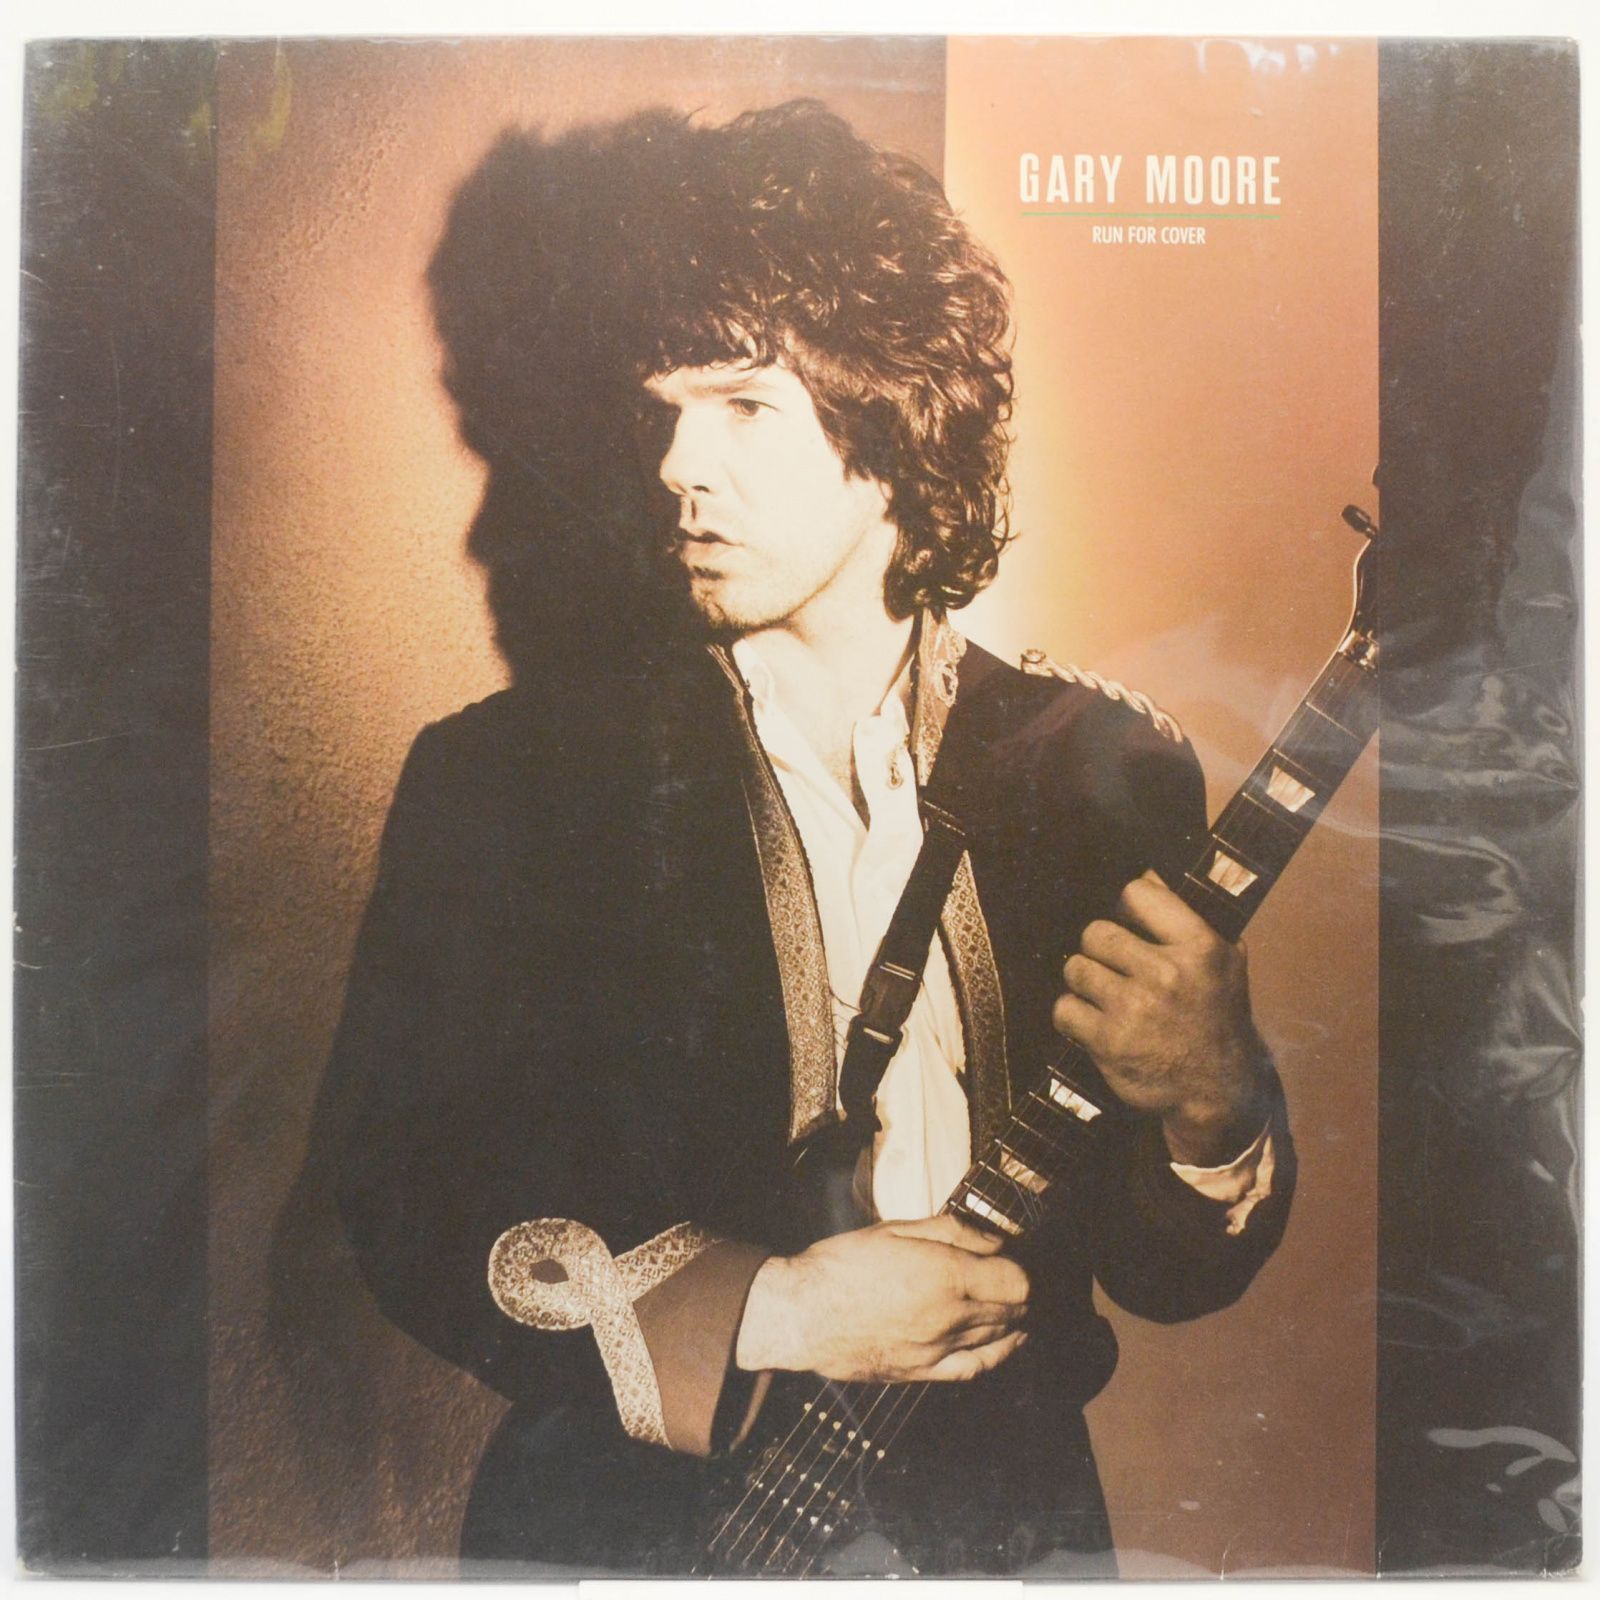 Gary Moore — Run For Cover, 1985